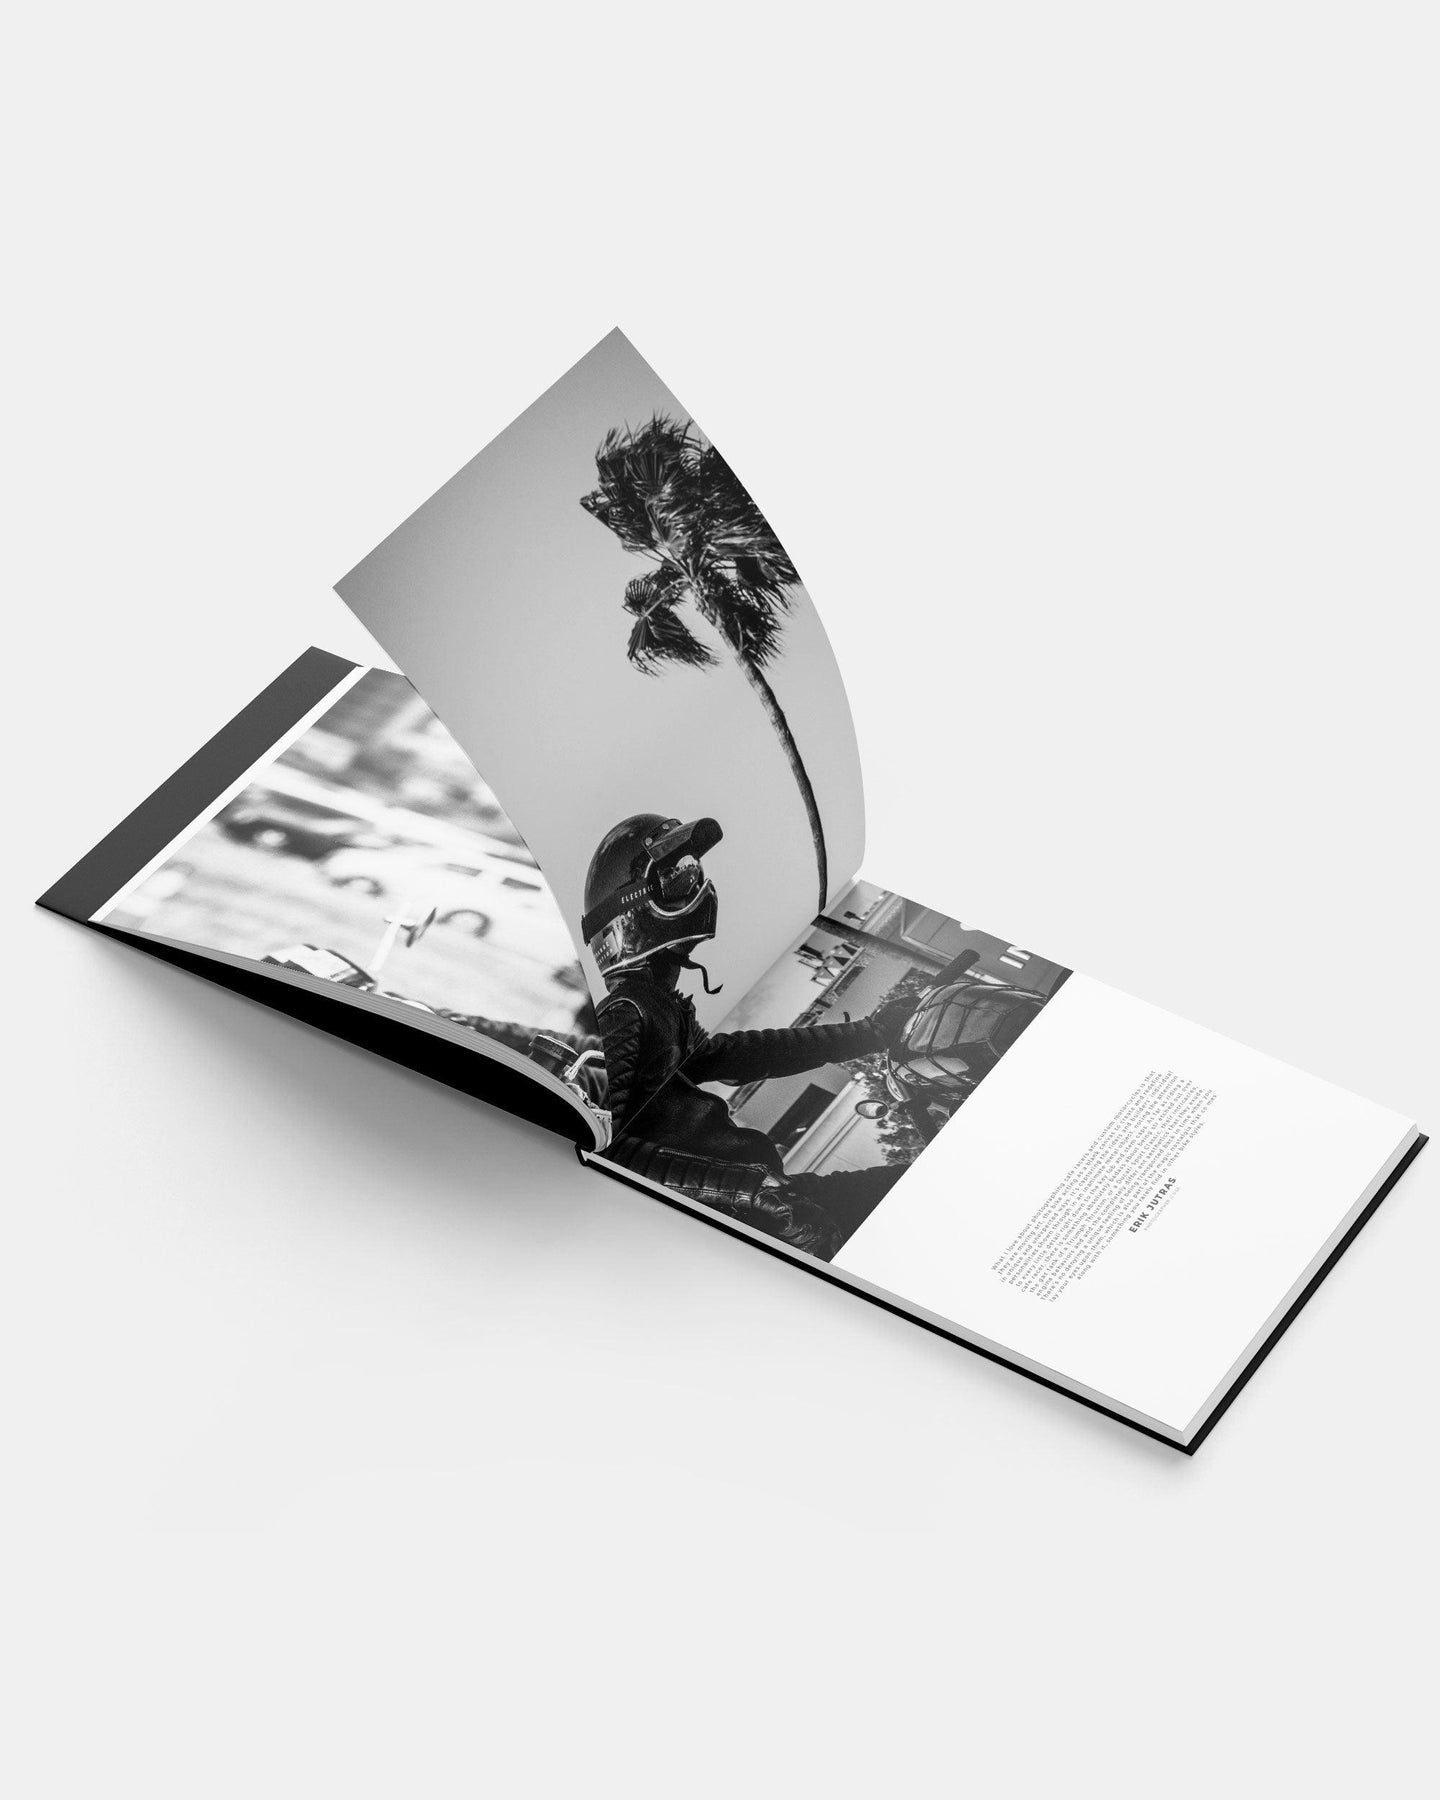 THE RACER WITHIN MOTORCYCLE PHOTO BOOK